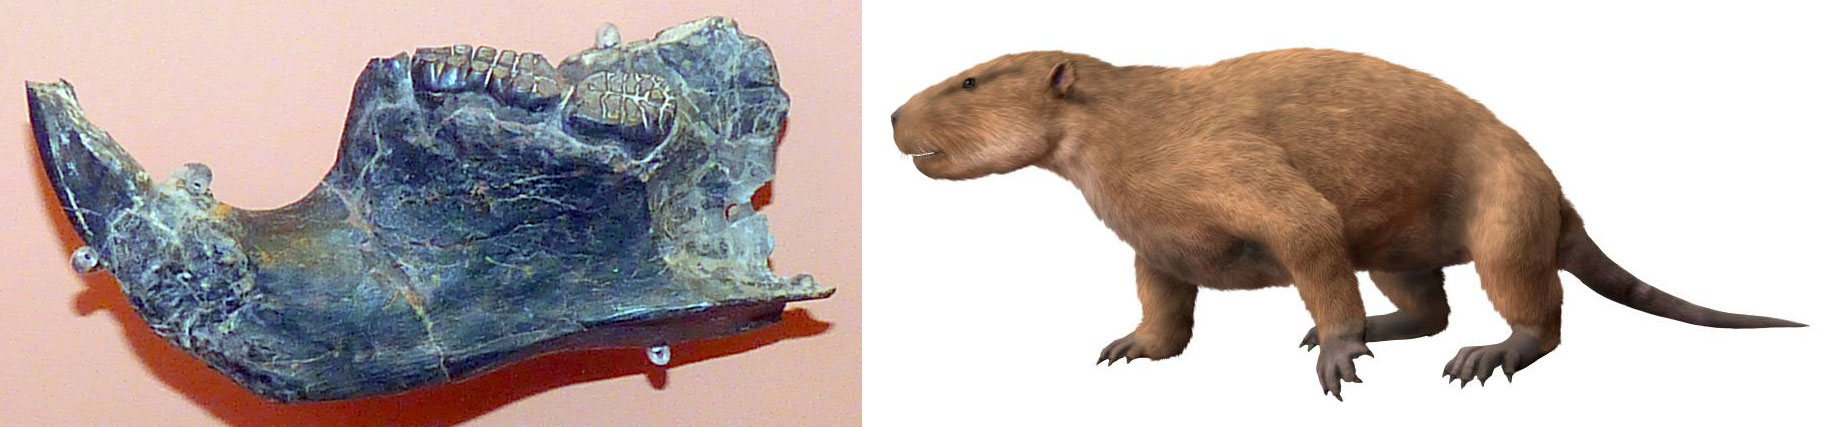 2-Panel image fo the multituberate mammal Taeniolabis from the Paleocene of New Mexico. Panel 1: Photograph of the jaw mounted on a wall. The front of the jaw curves upward into a point. The teeth are flat and rectangular with multiple cusps. Panel 2: Reconstruction of the living animal showing is as a woodchuck or beaver-like creature with a thin, pointed tail.